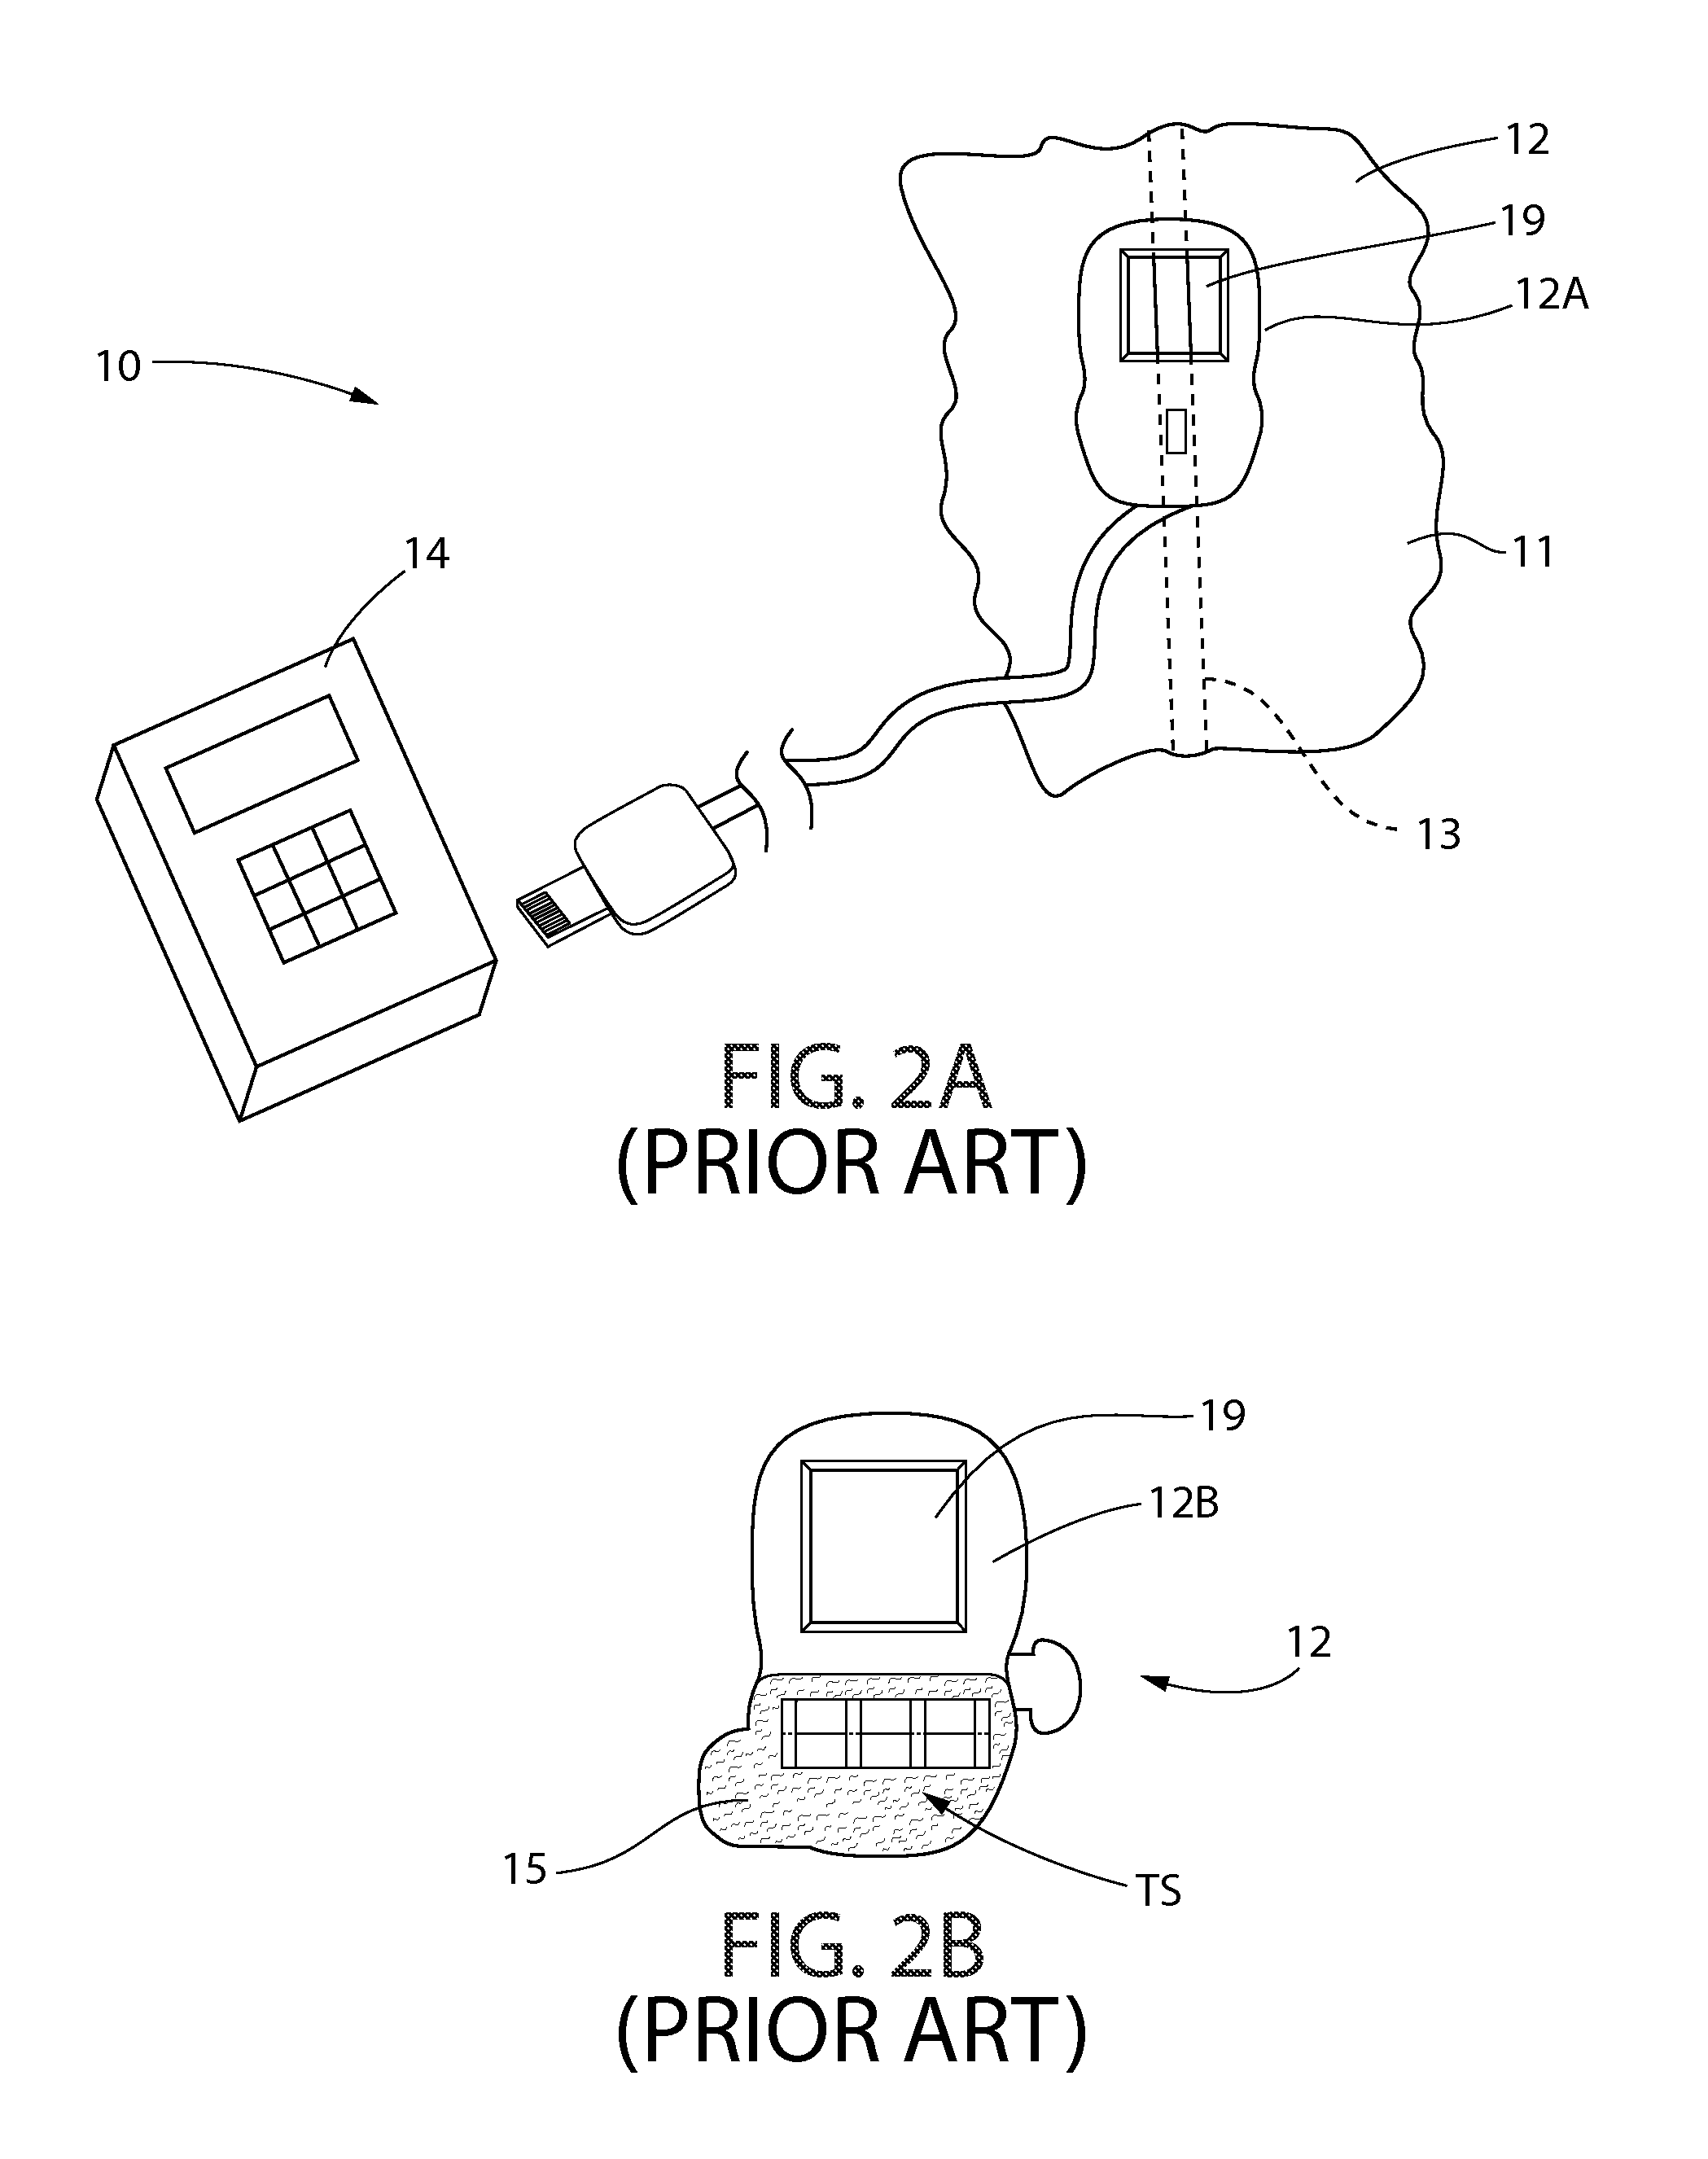 CSF shunt flow evaluation apparatus and method using a conformable expanded dynamic range thermosensor